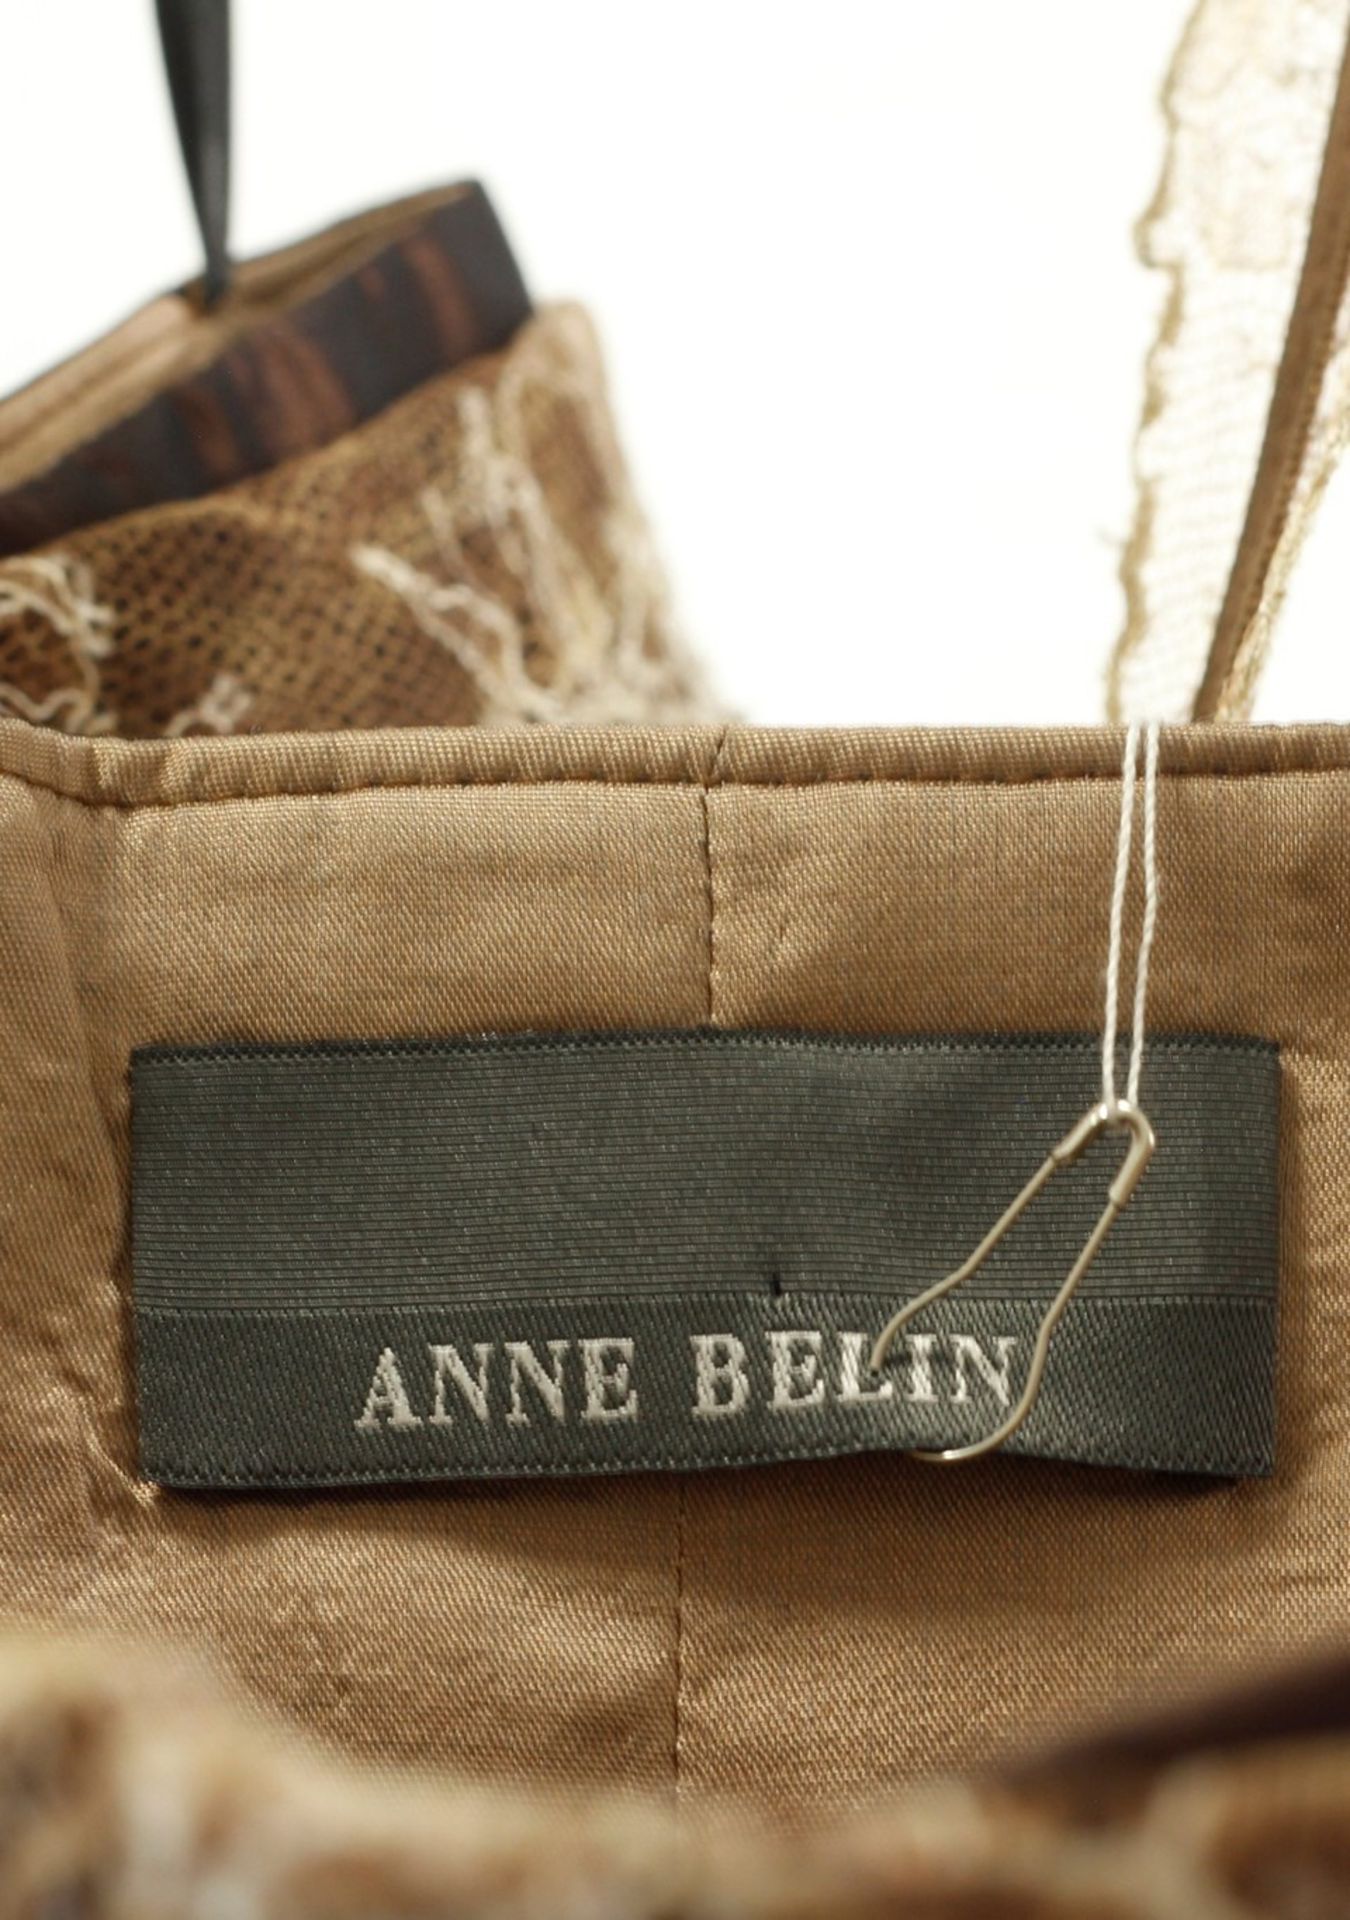 1 x Anne Belin Brown Halterneck - Size: 20 - Material: 100% Silk - From a High End Clothing Boutique - Image 3 of 6